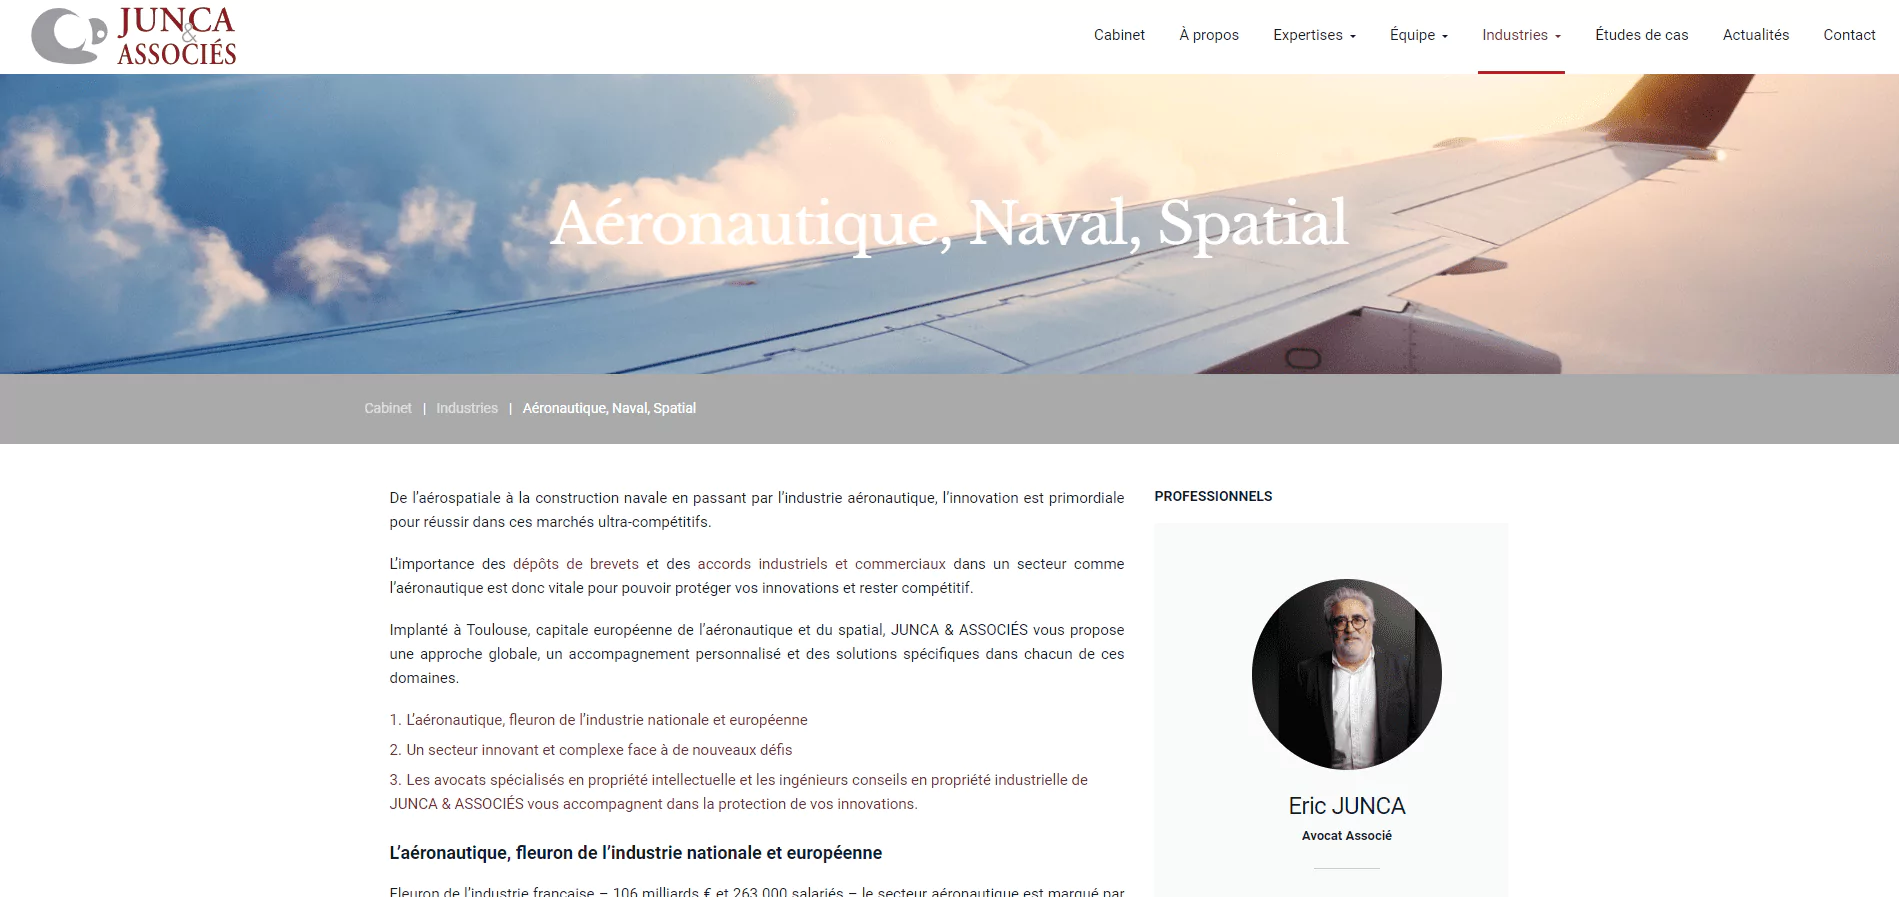 baccaan-digital-consulting-client-project-wordpress-website-aeronautic-naval-and-spatial-industry-service